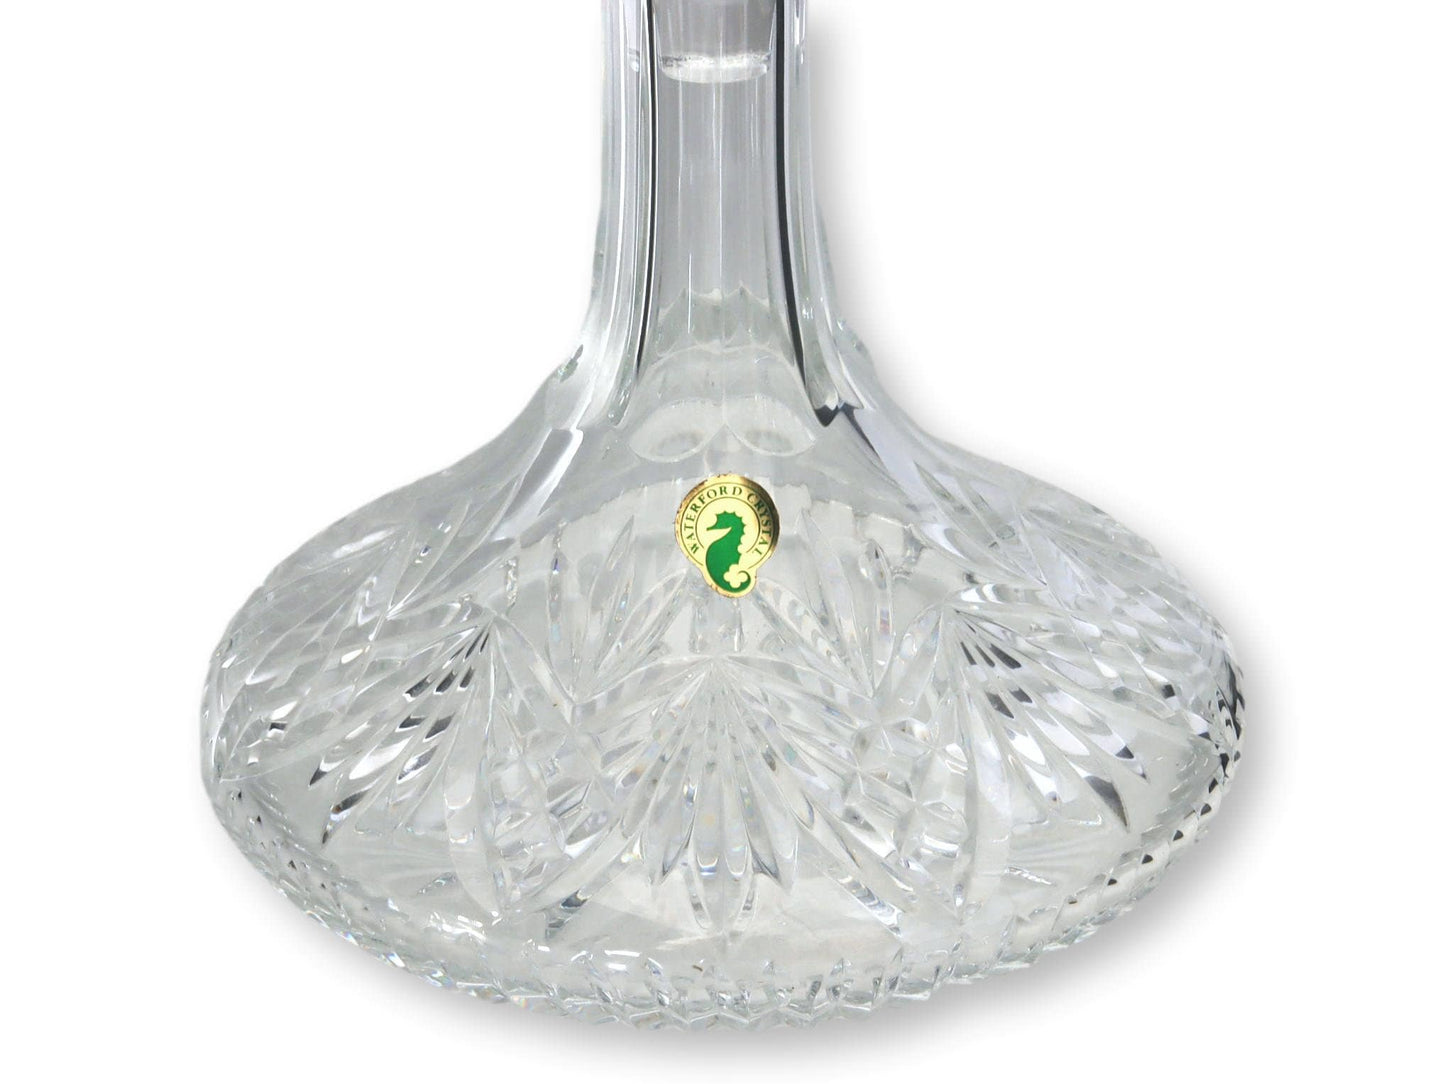 Vintage Waterford Cut Crystal Ships Decanter